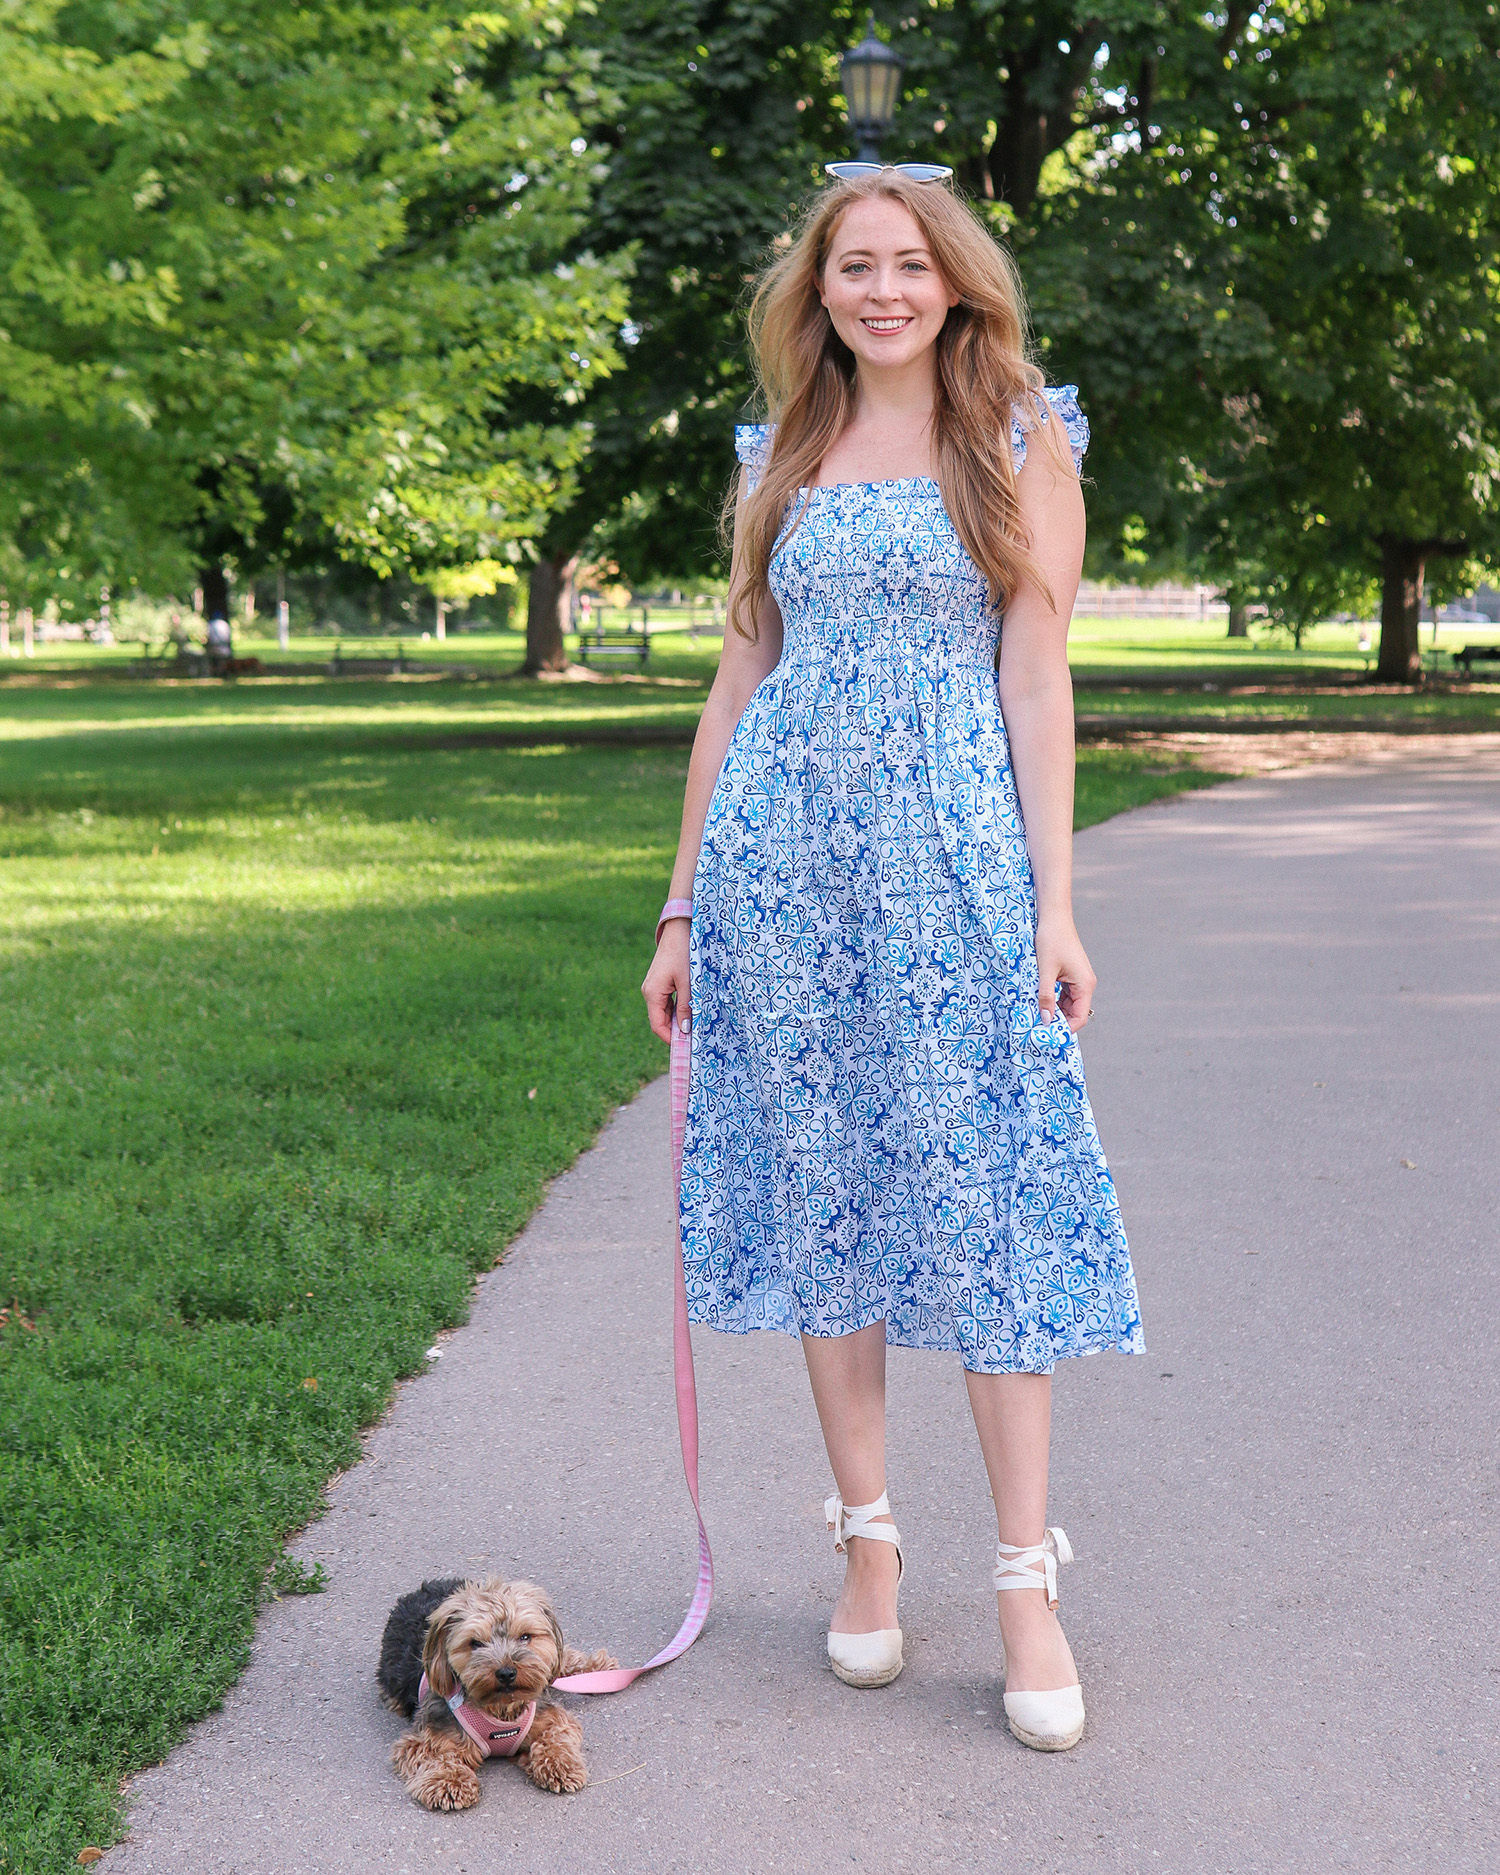 Hill House Ellie Nap Dress in Blue Mosaic is a classic wardrobe staple that works for sightseeing in Greece or the Amalfi Coast, or a casual summer barbecue with a pair of sneakers. I love how versatile this cotton smocked dress is!